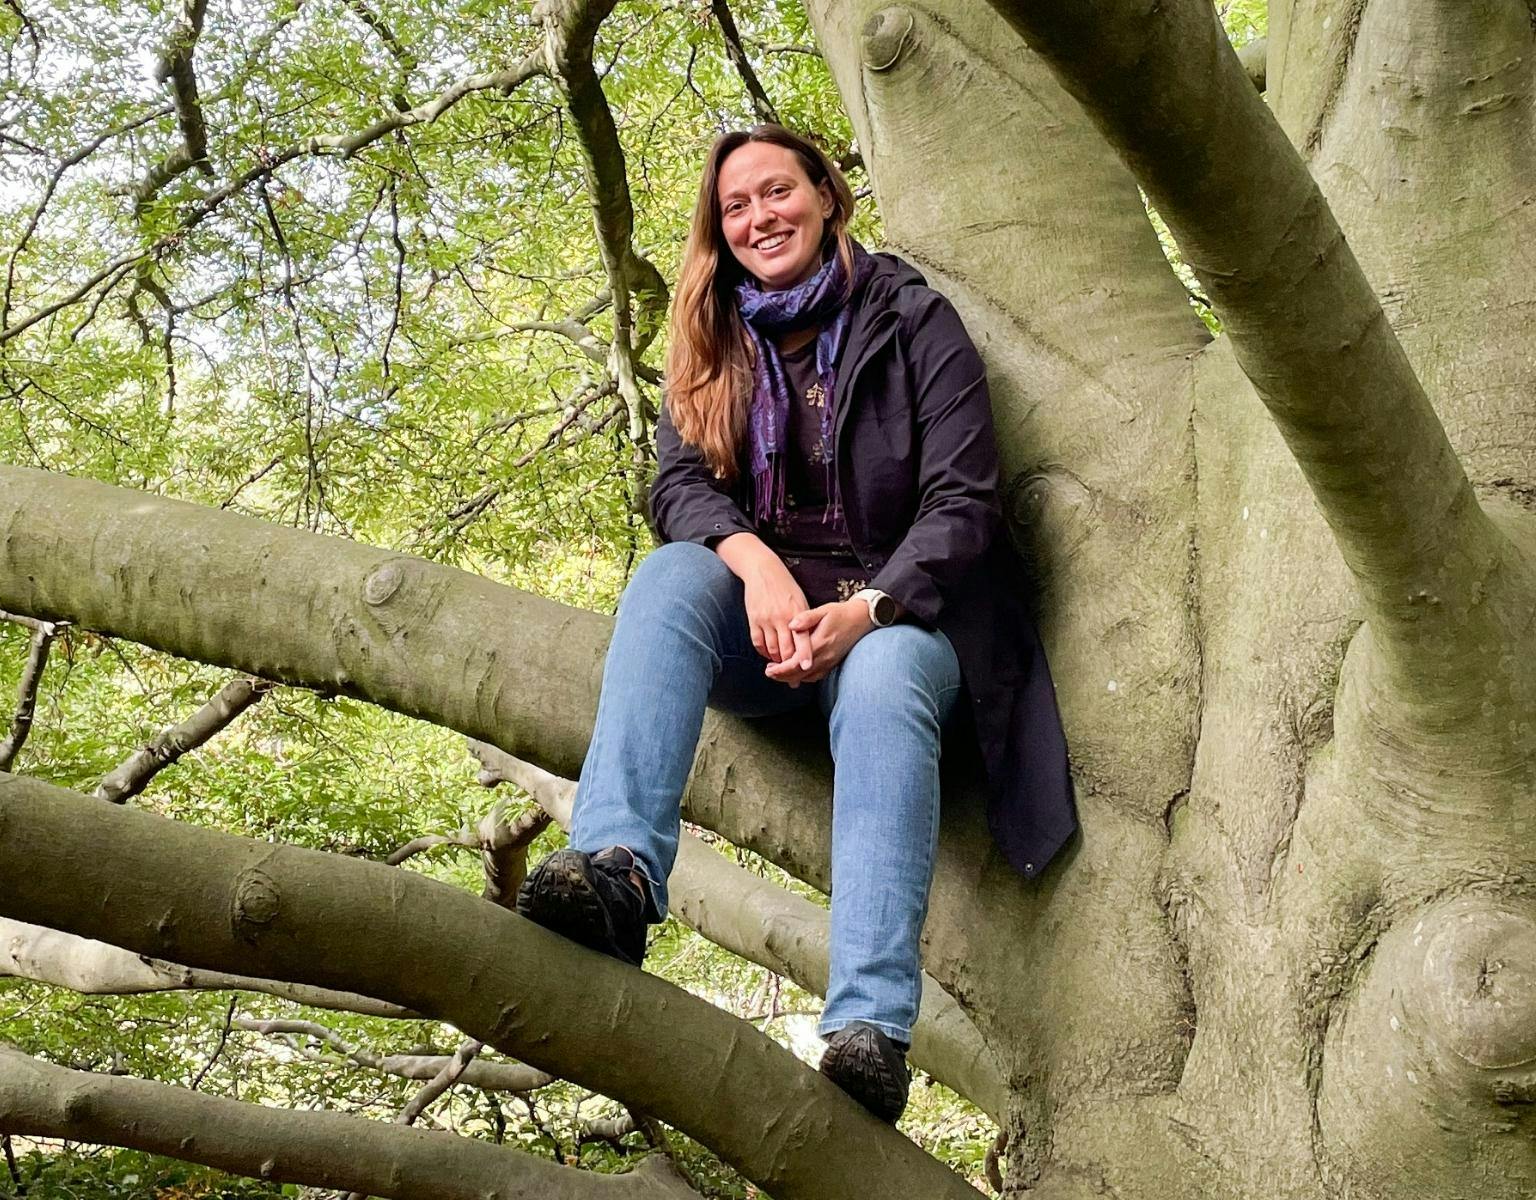 Sarah Bourke, a woman with long light brown hair and wearing jeans, hiking shoes and a rain jacket, sits on the branches of a large tree.